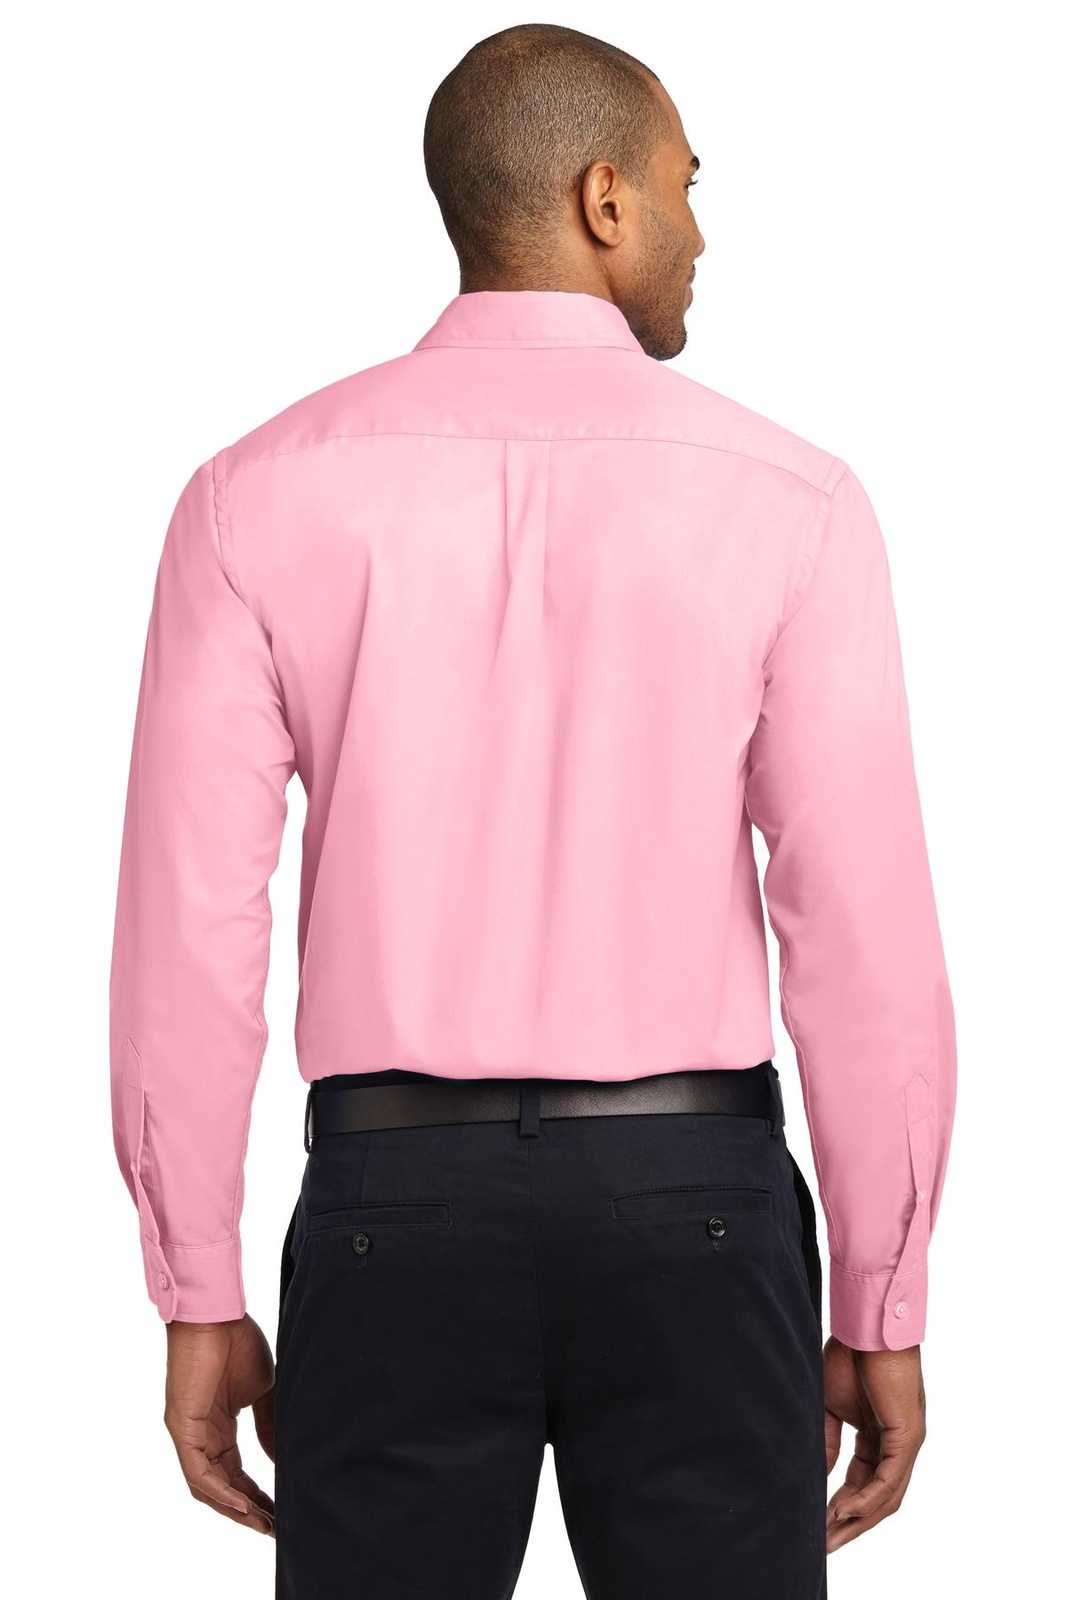 Port Authority S608 Long Sleeve Easy Care Shirt - Light Pink - HIT a Double - 2